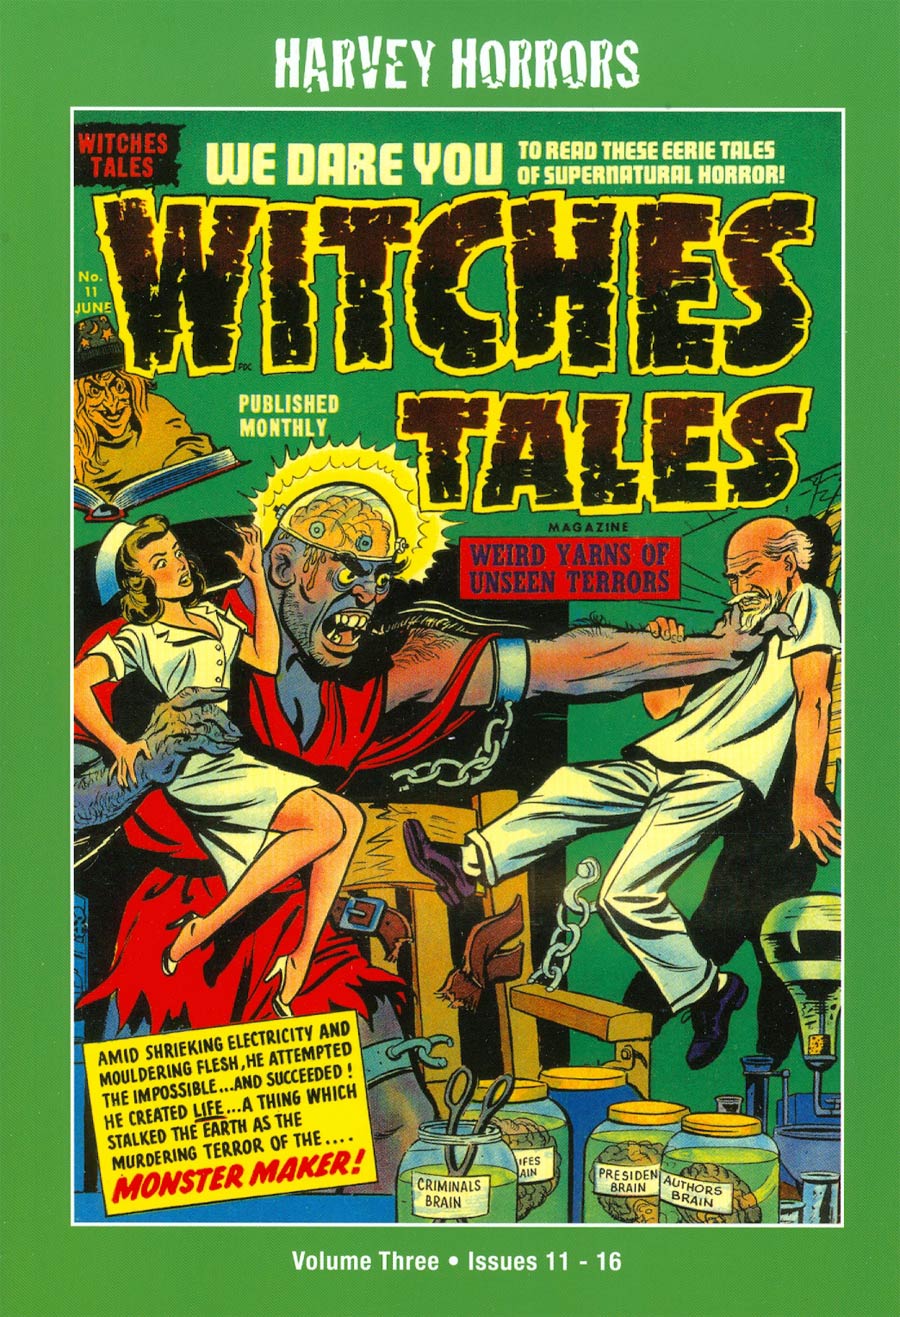 Harvey Horrors Witches Tales Softie Vol 3 TP